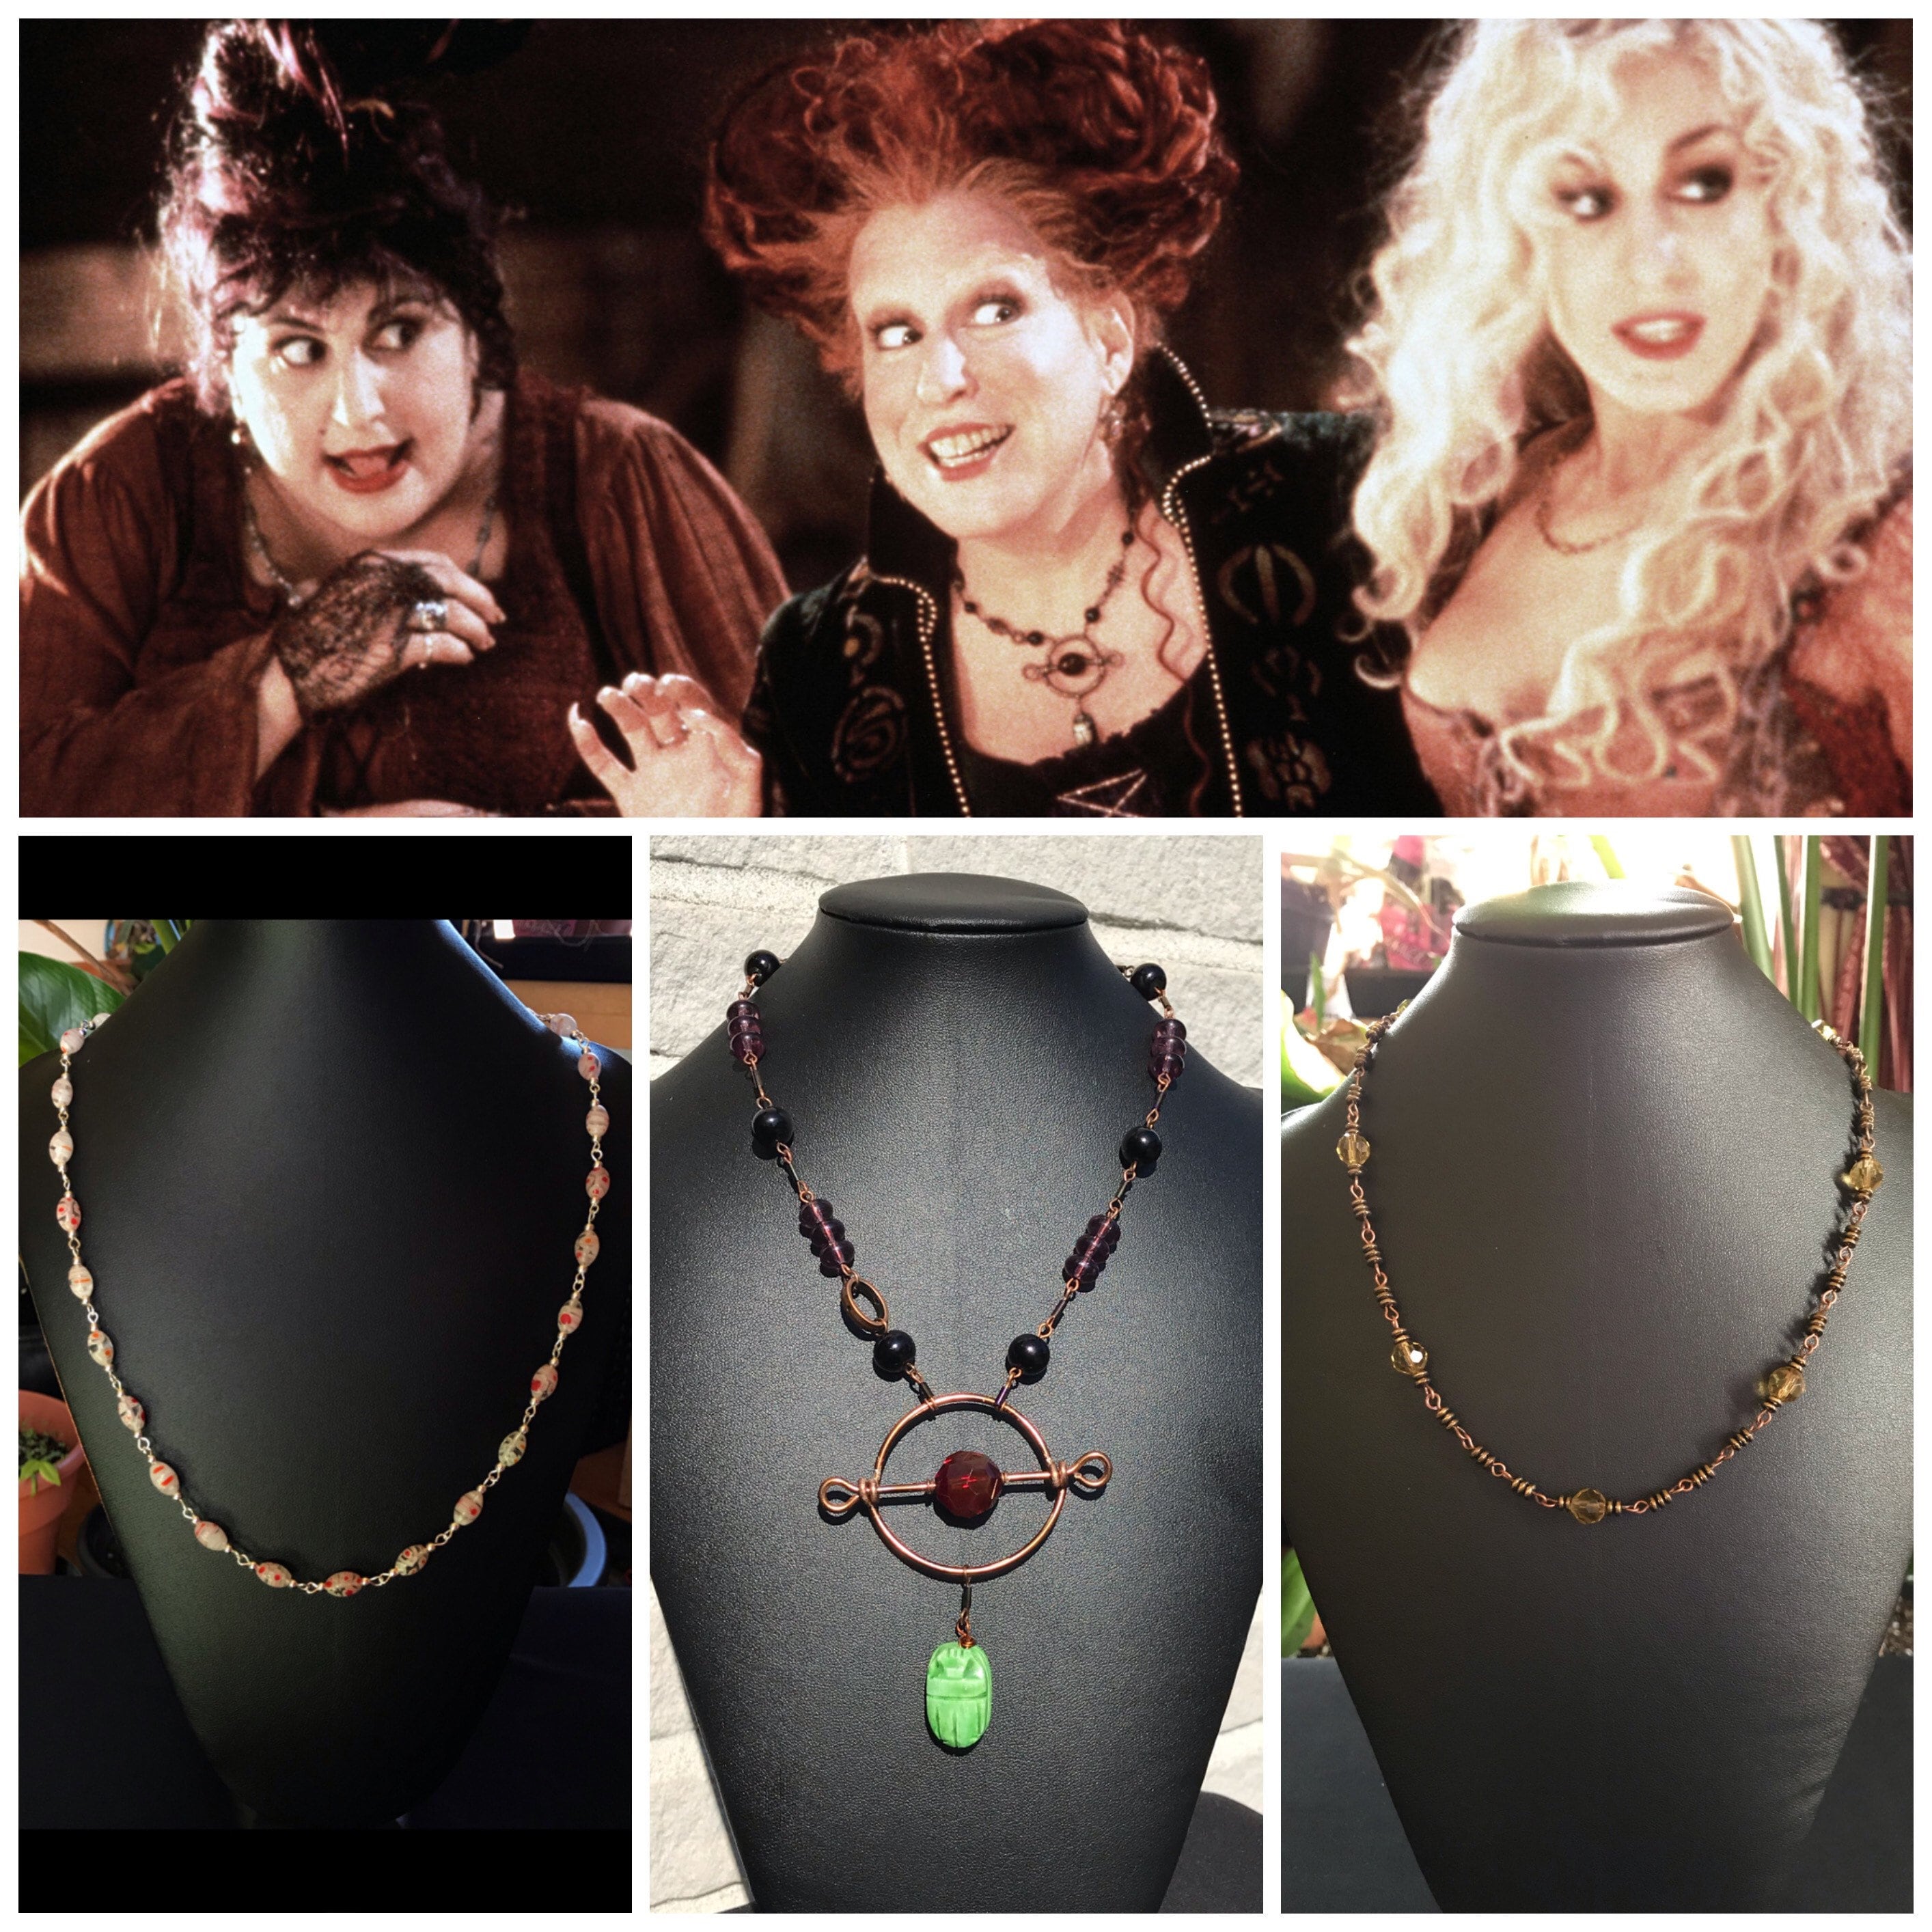 Amazon.com : Mildiso Winifred Sanderson Wig Costume Women with Earrings +  Teeth + Necklace Short Curly Wavy Hair Wig with Wig Caps Cute Colored  Synthetic Wig for Party Halloween M112BR : Beauty